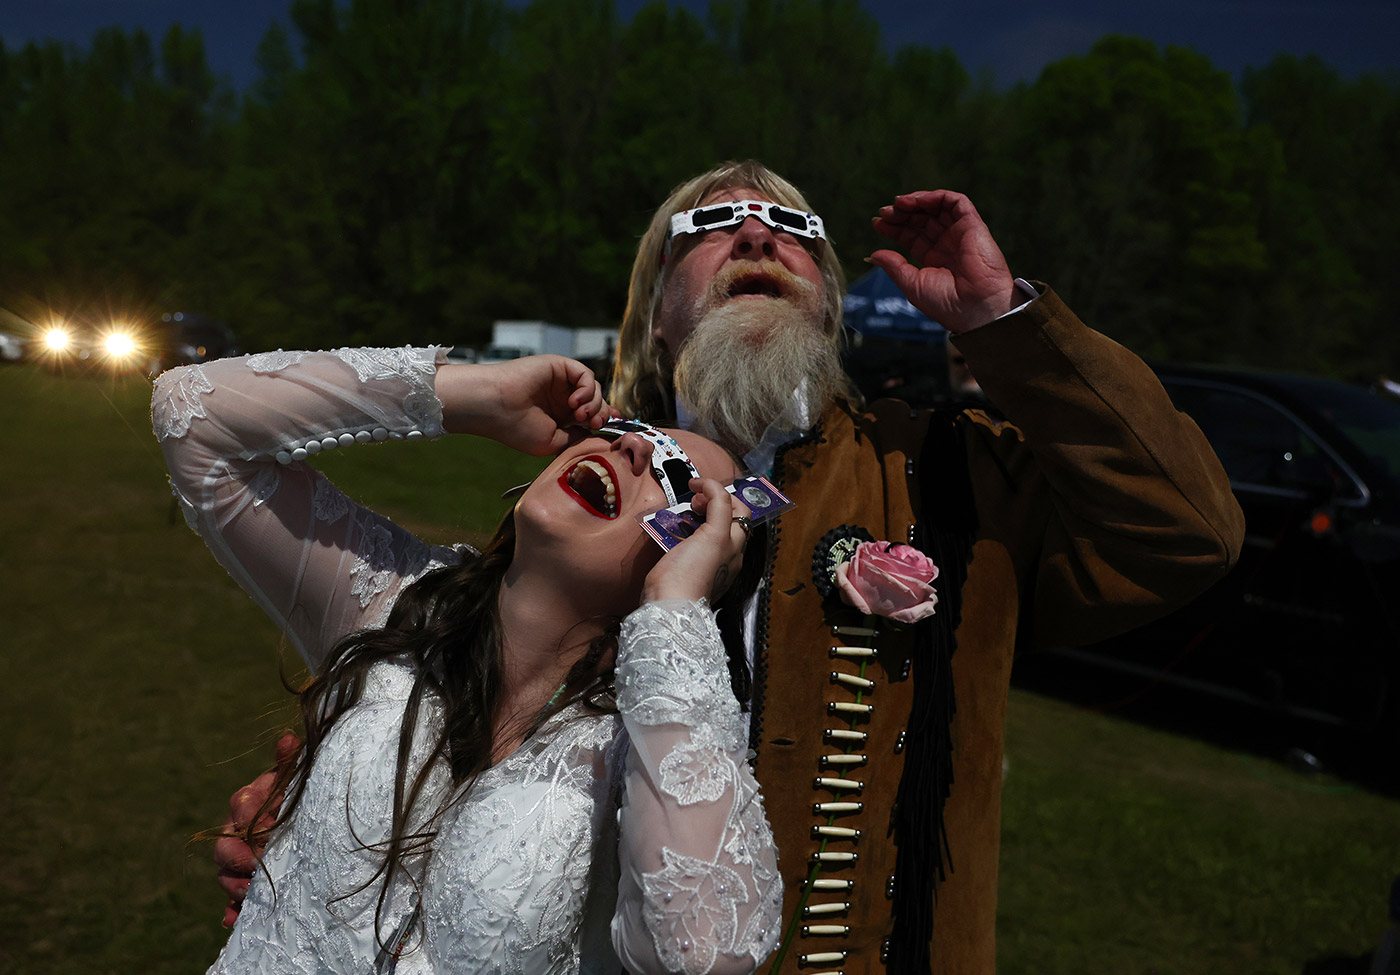 A bride and groom view the solar eclipse after marrying at a mass wedding in Russellville, Arkansas - 8 April 2024 (Mario Tama/Getty Images)